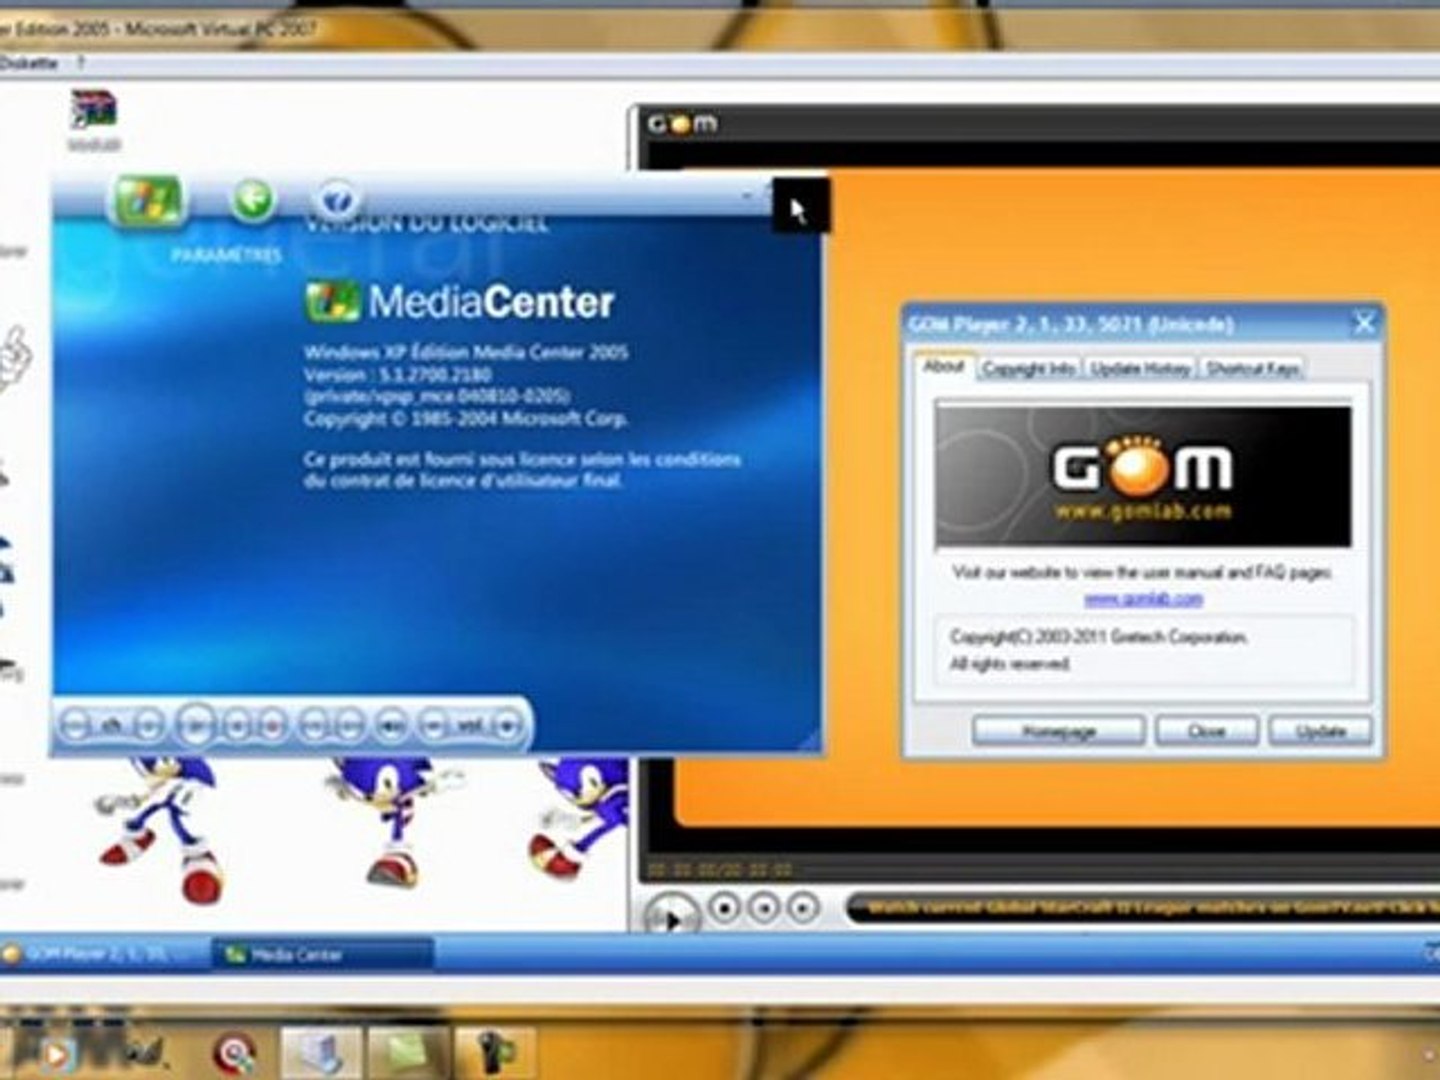 Windows XP Media Center Edition 2005 (French) IN Virtual PC 2007 - YouTube  - Dailymotion Video